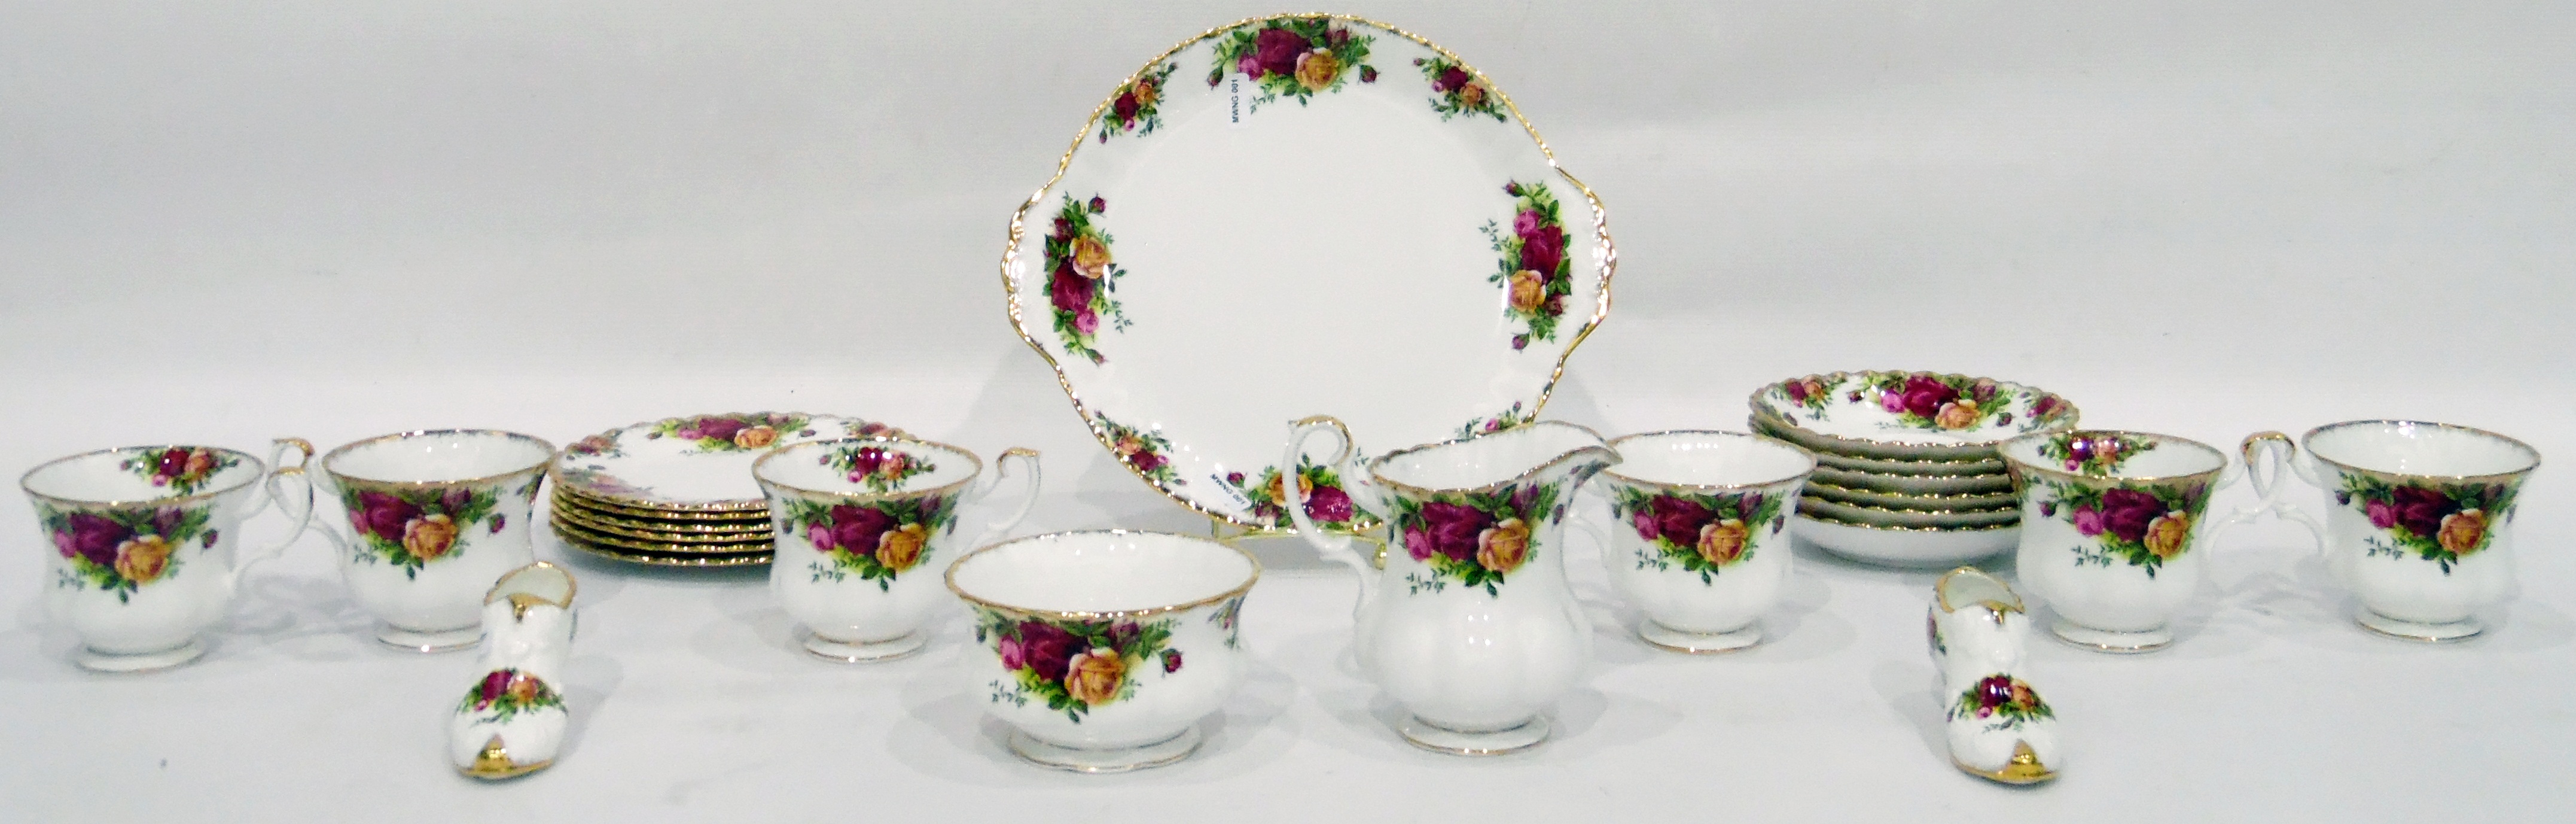 Royal Albert 'Old Country Roses' pattern tea set comprising six cups, saucers, side plates, - Image 2 of 3